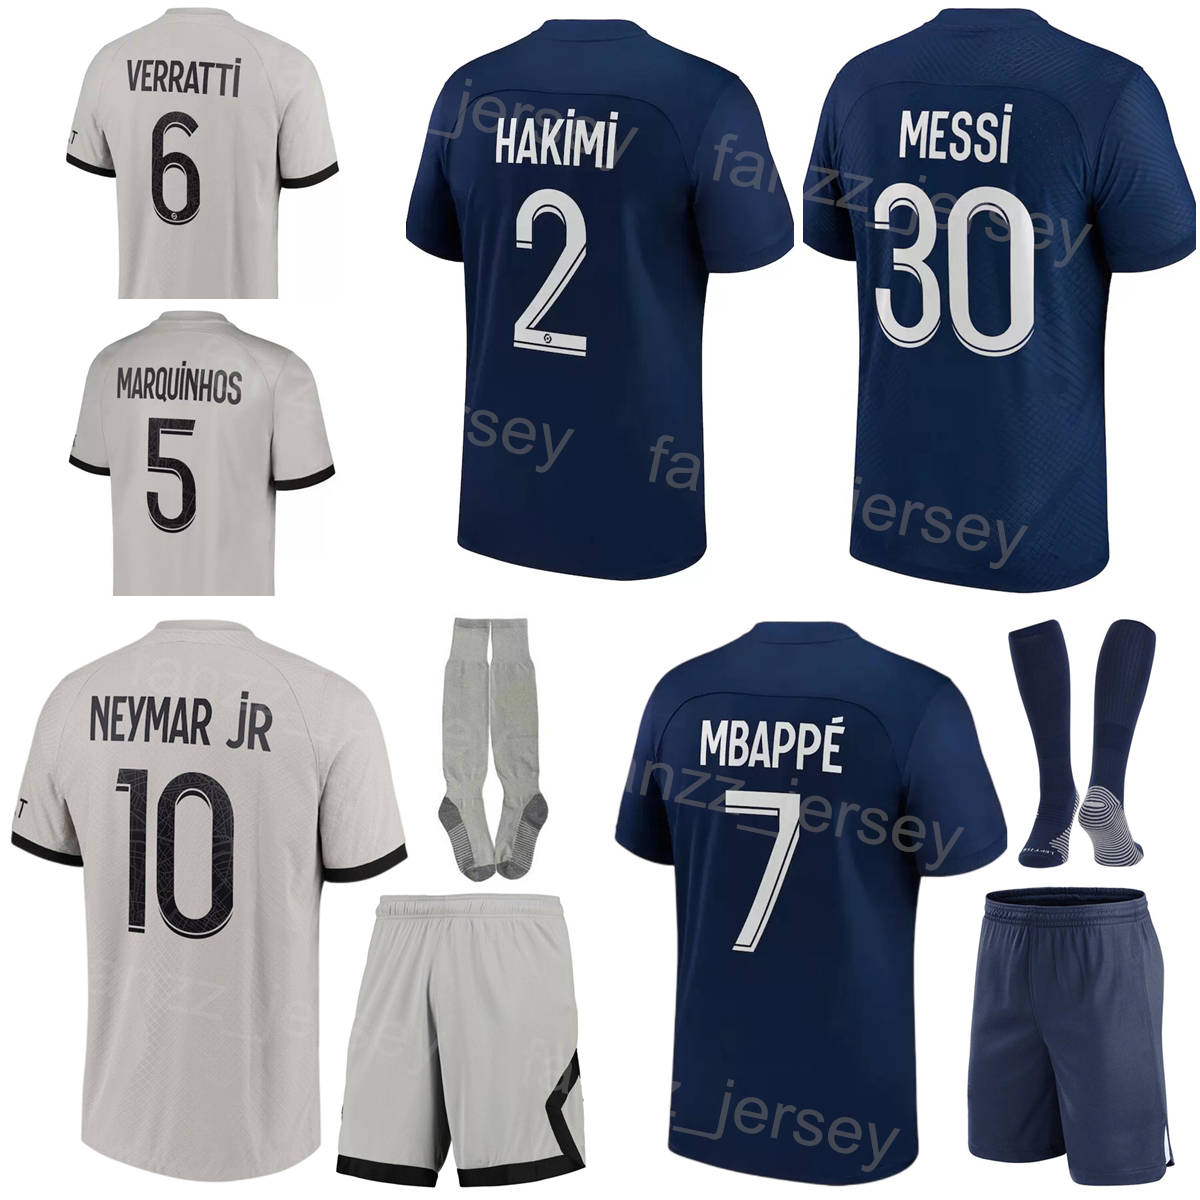 

2022-23 Man Youth Club FC 19 SARABIA Soccer Jersey Set 30 M E S S I 23 DRAXLER 2 HAKIMI 5 MARQUINHOS 10 NEYMAR JR 25 MENDES 7 MBAPPE Football Shirt Kits For Sport Fans BaLi, Men with patch